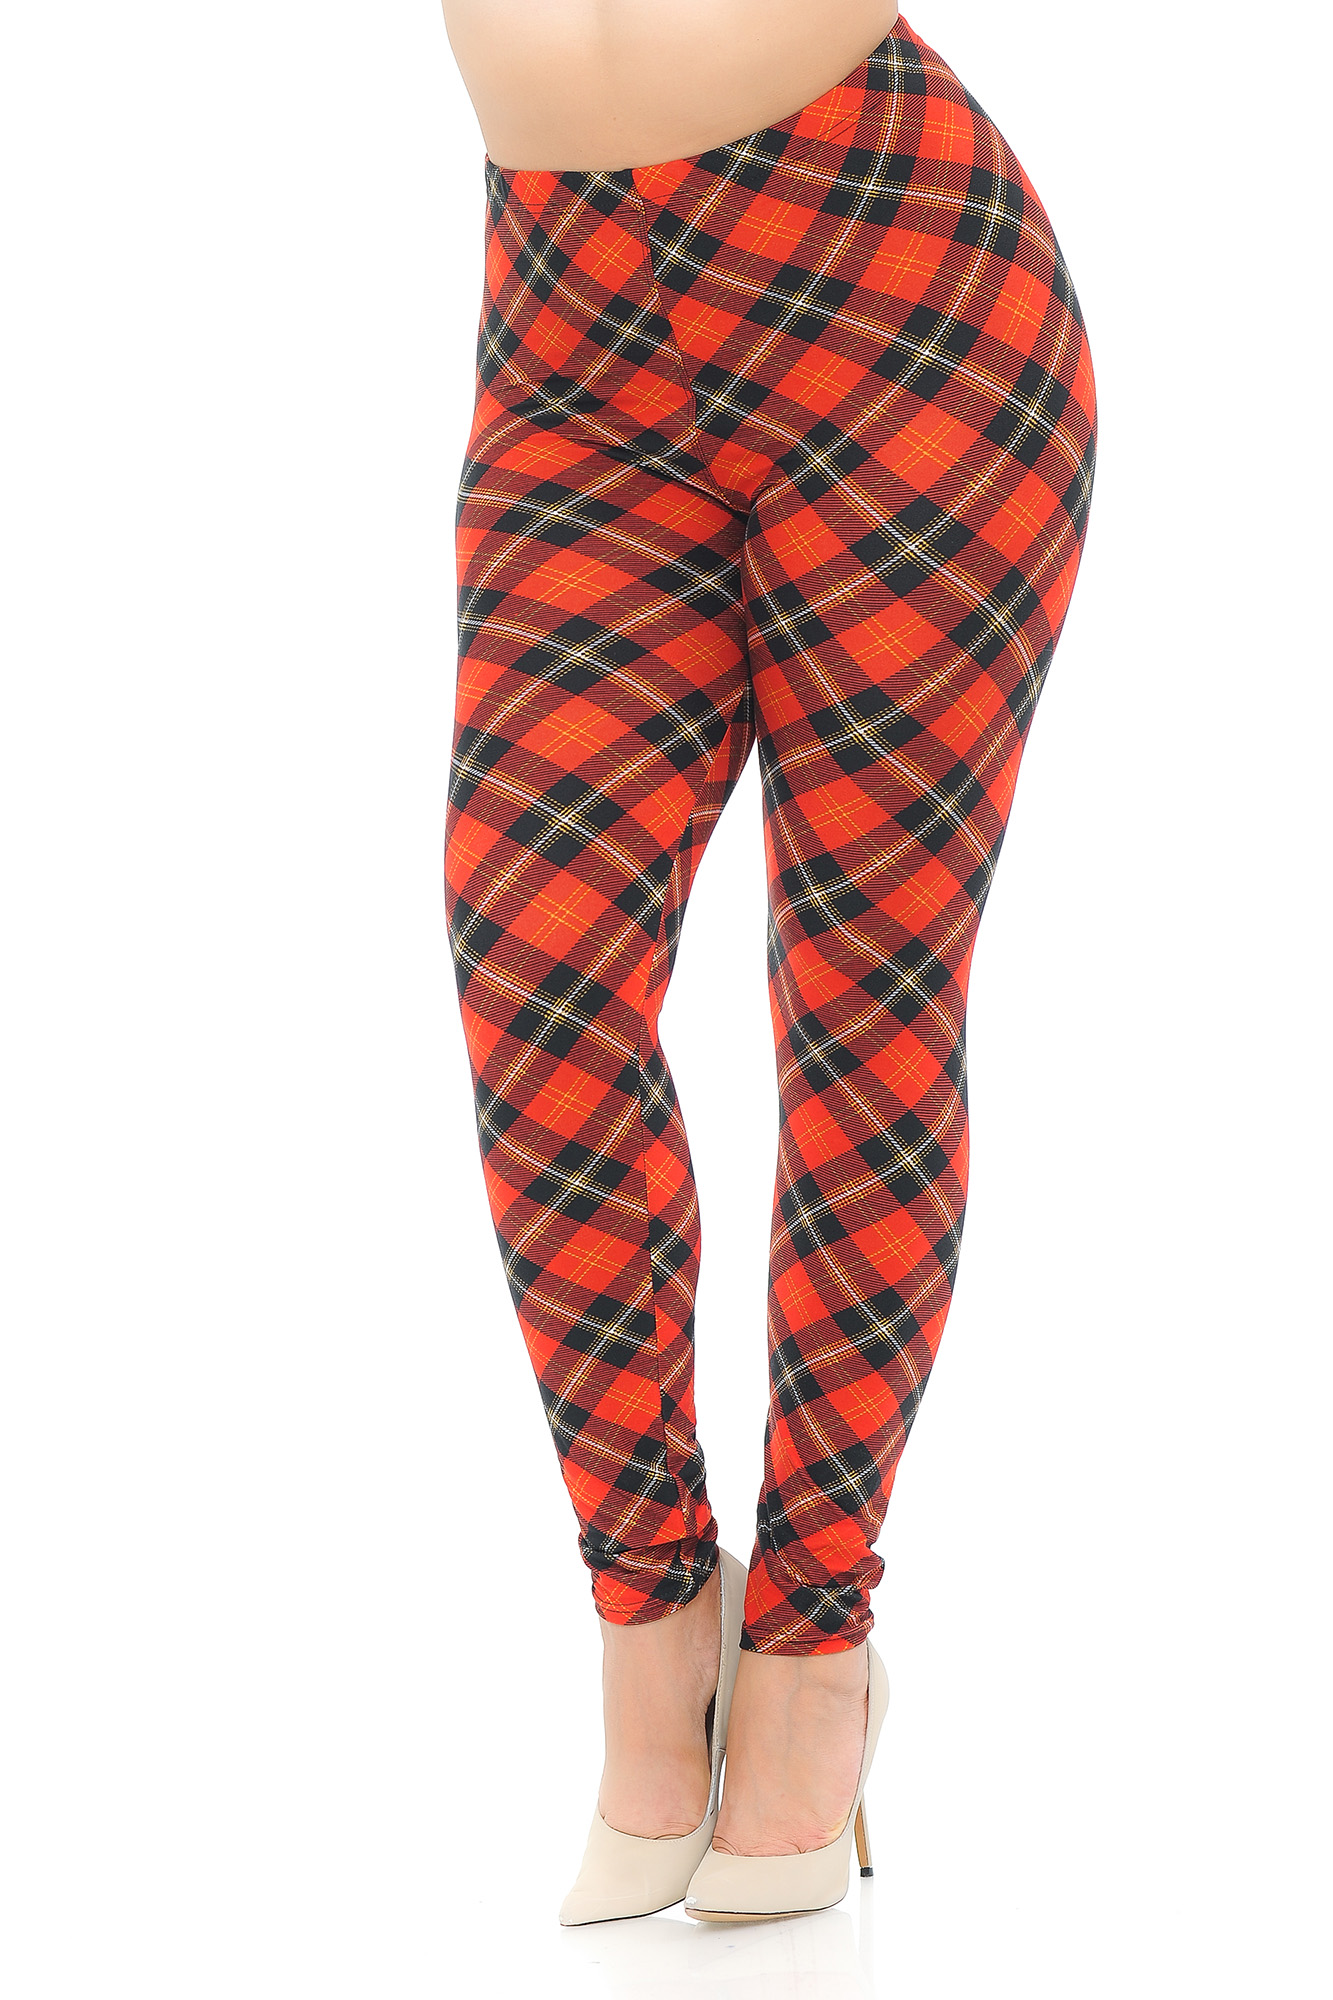 Wholesale Buttery Smooth Classic Red Plaid Extra Plus Size Leggings - 3X-5X